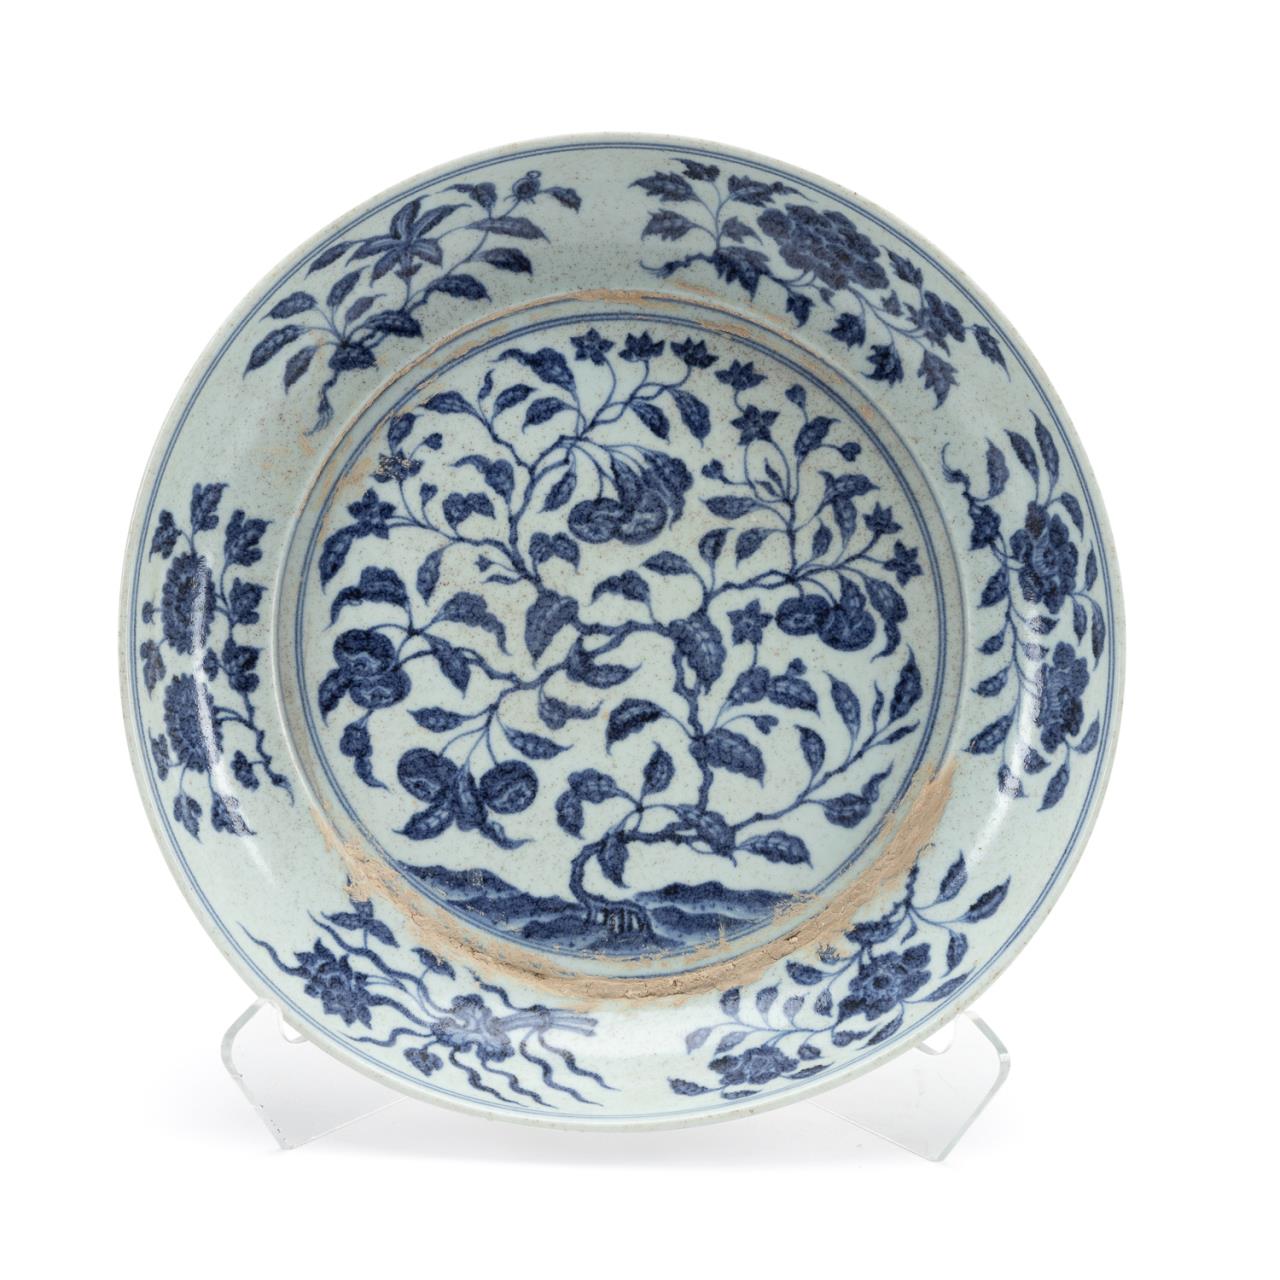 CHINESE MING STYLE BLUE AND WHITE